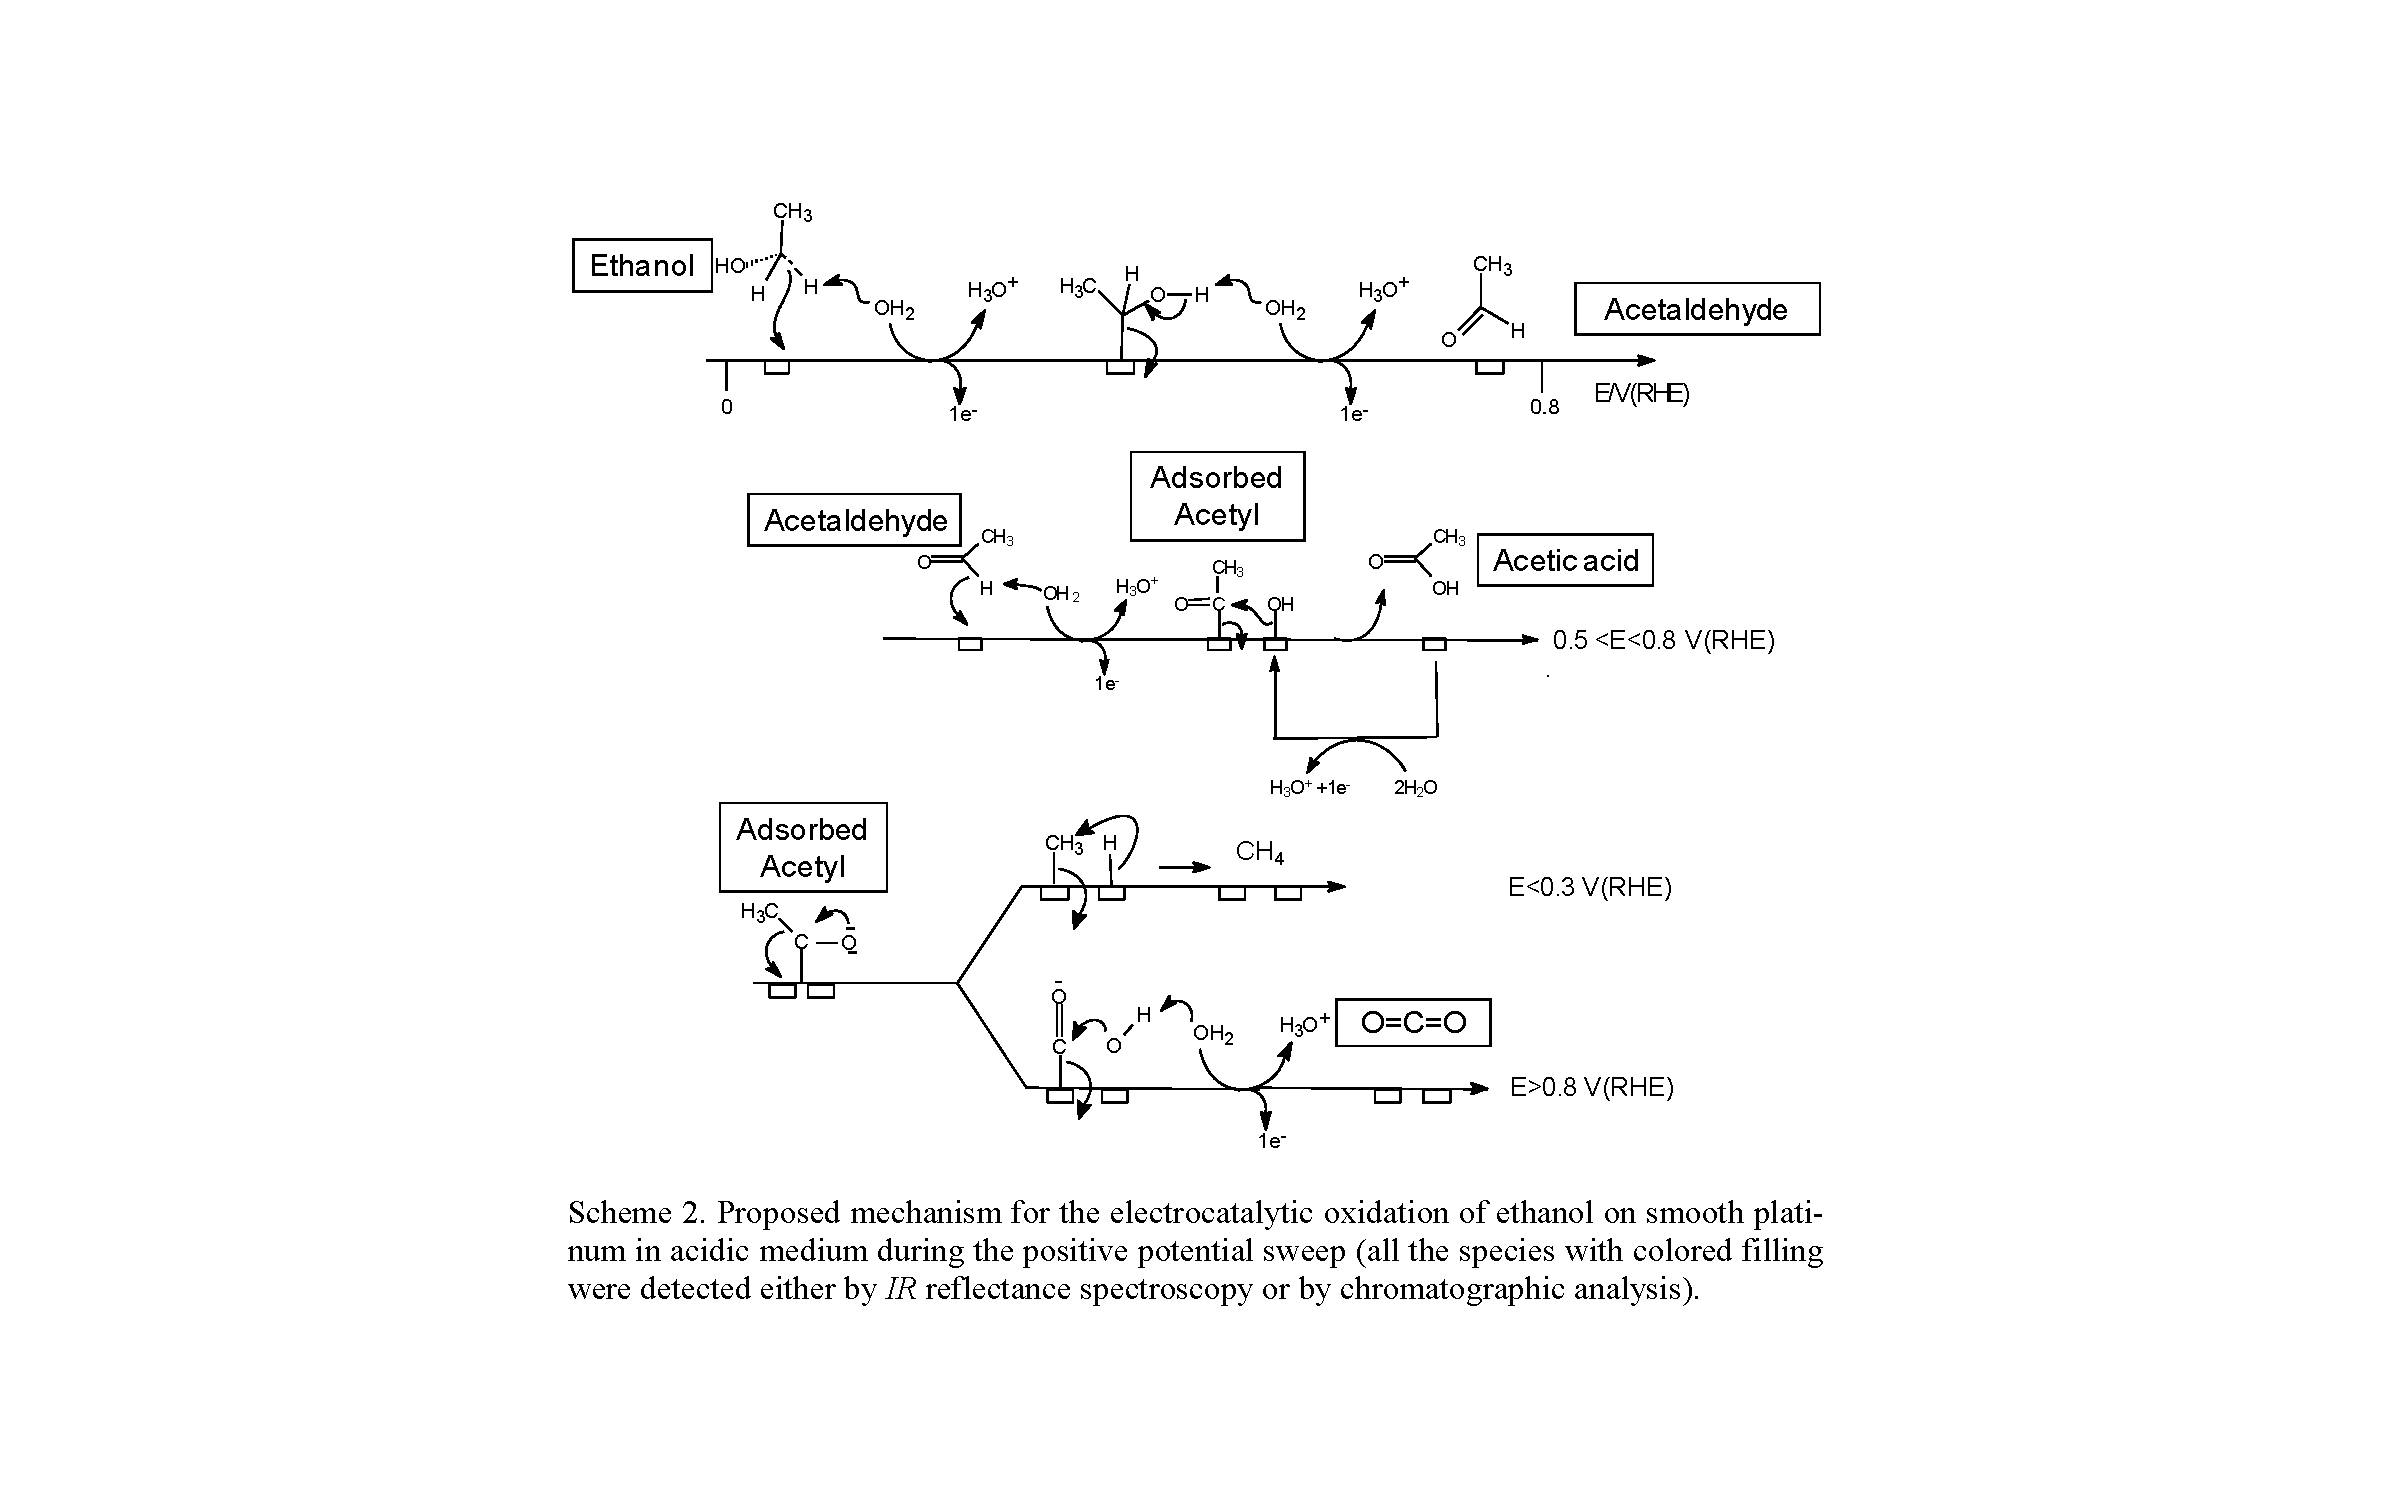 Scheme 2. Proposed mechanism for the electrocatalytic oxidation of ethanol on smooth platinum in acidic medium during the positive potential sweep (all the species with colored filling were detected either by IR reflectance spectroscopy or by chromatographic analysis).